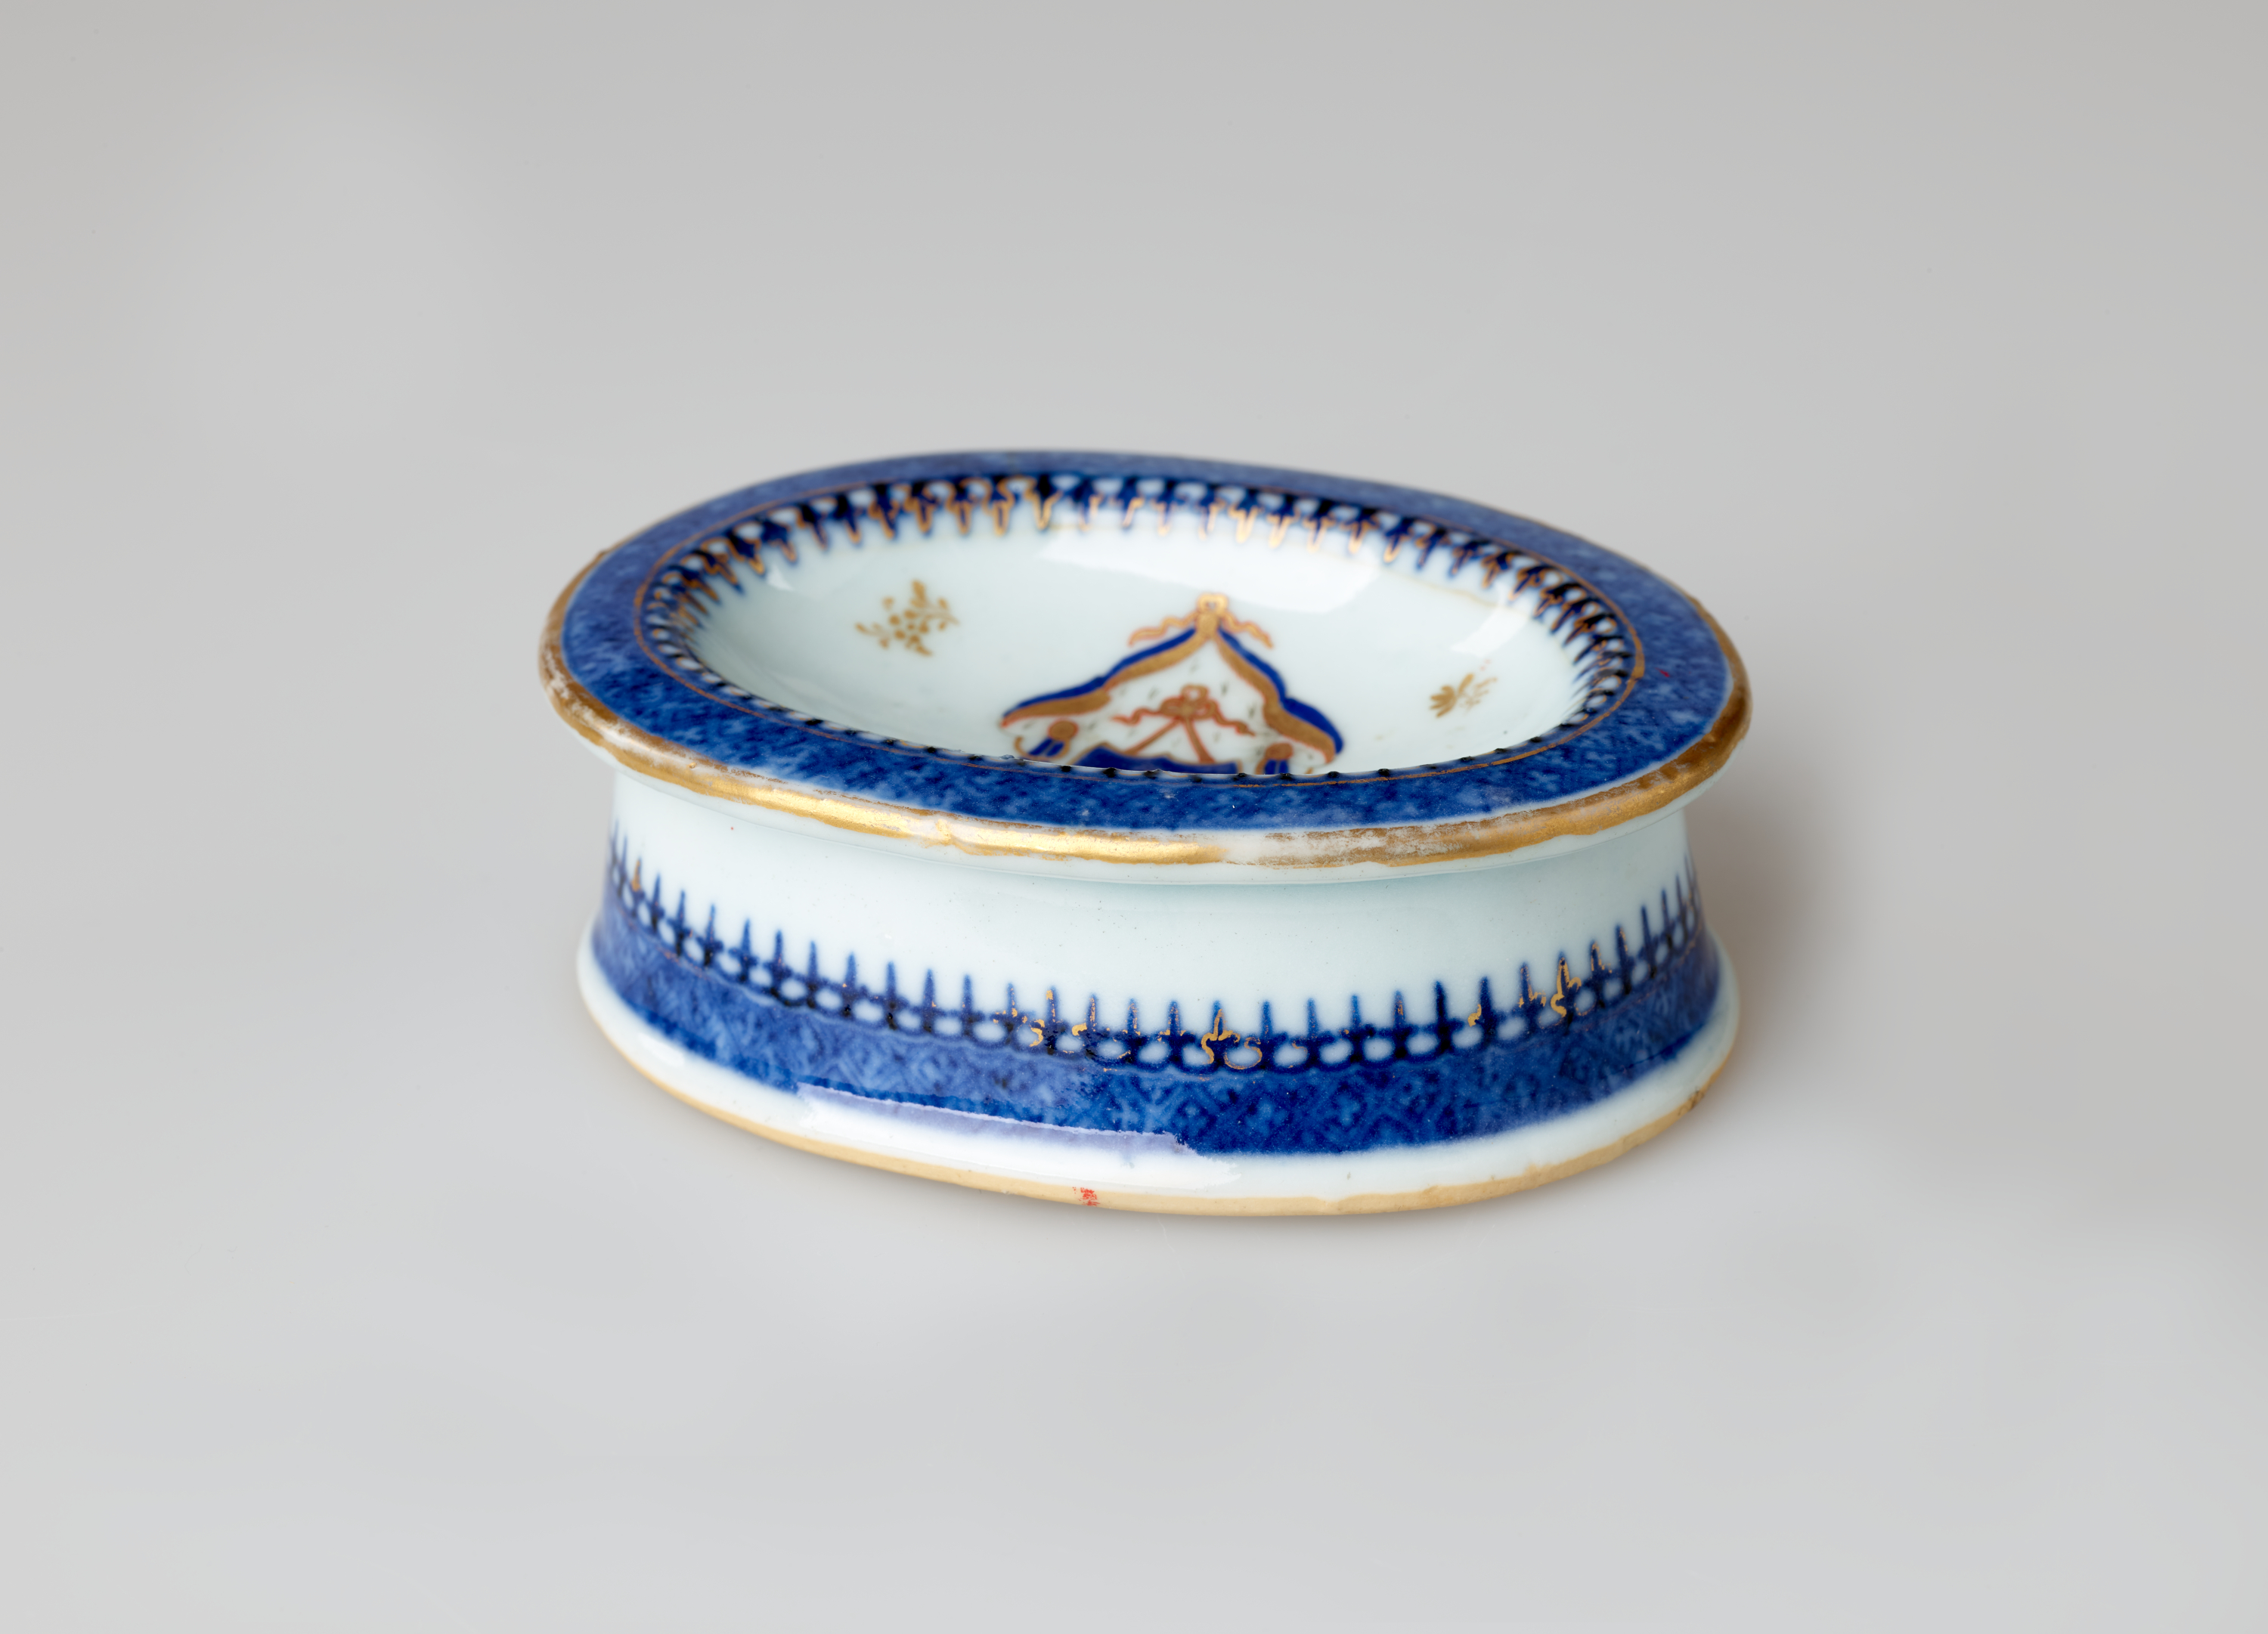 /An%20oval%20porcelain%20white%20salt%20container%20with%20blue%20and%20gilded%20decorations.%20